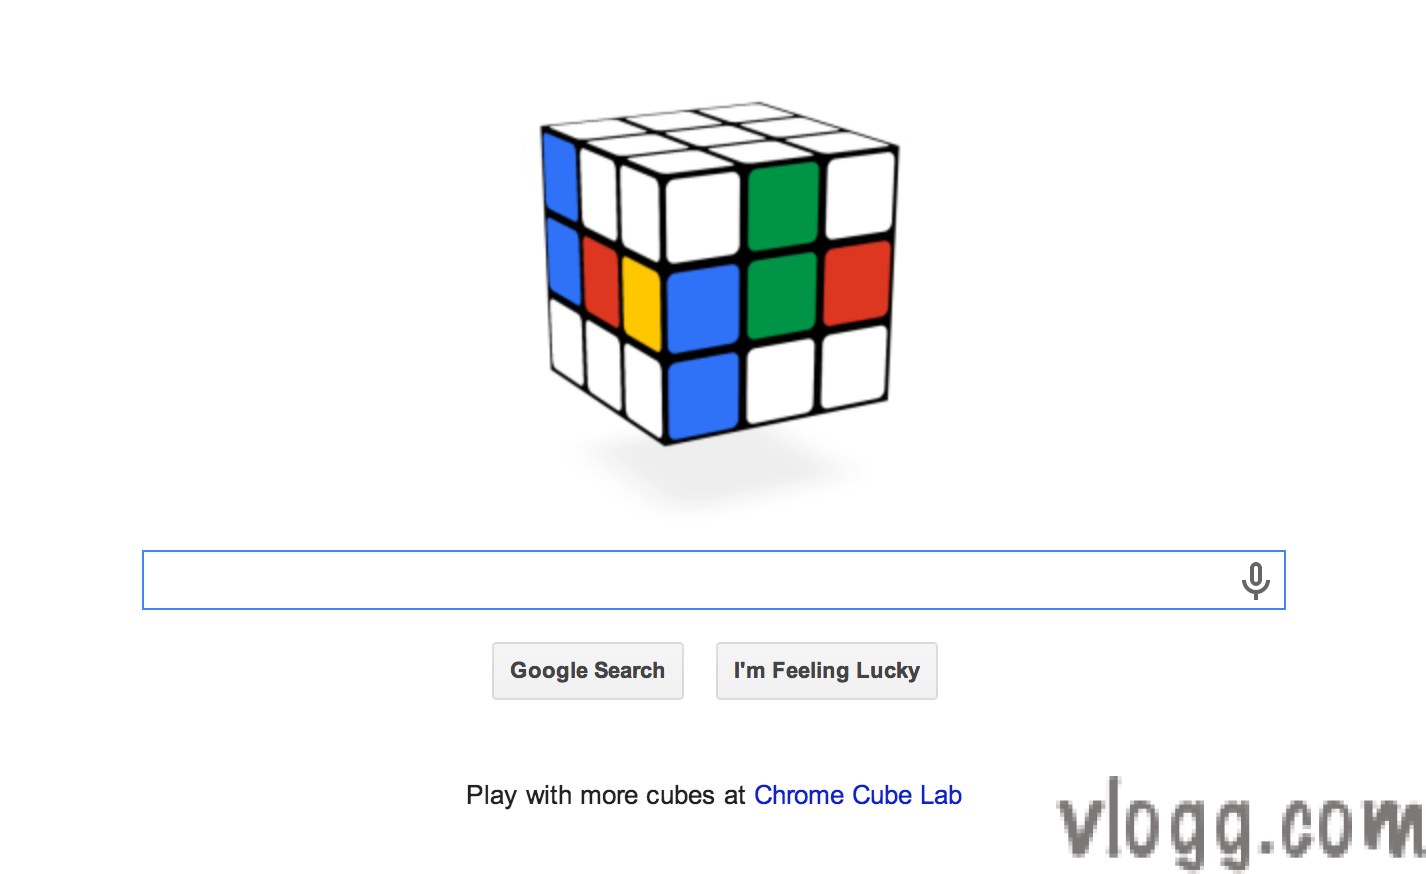 Google Doodle Today Honors Rubik’s Cube 40th Aniversary